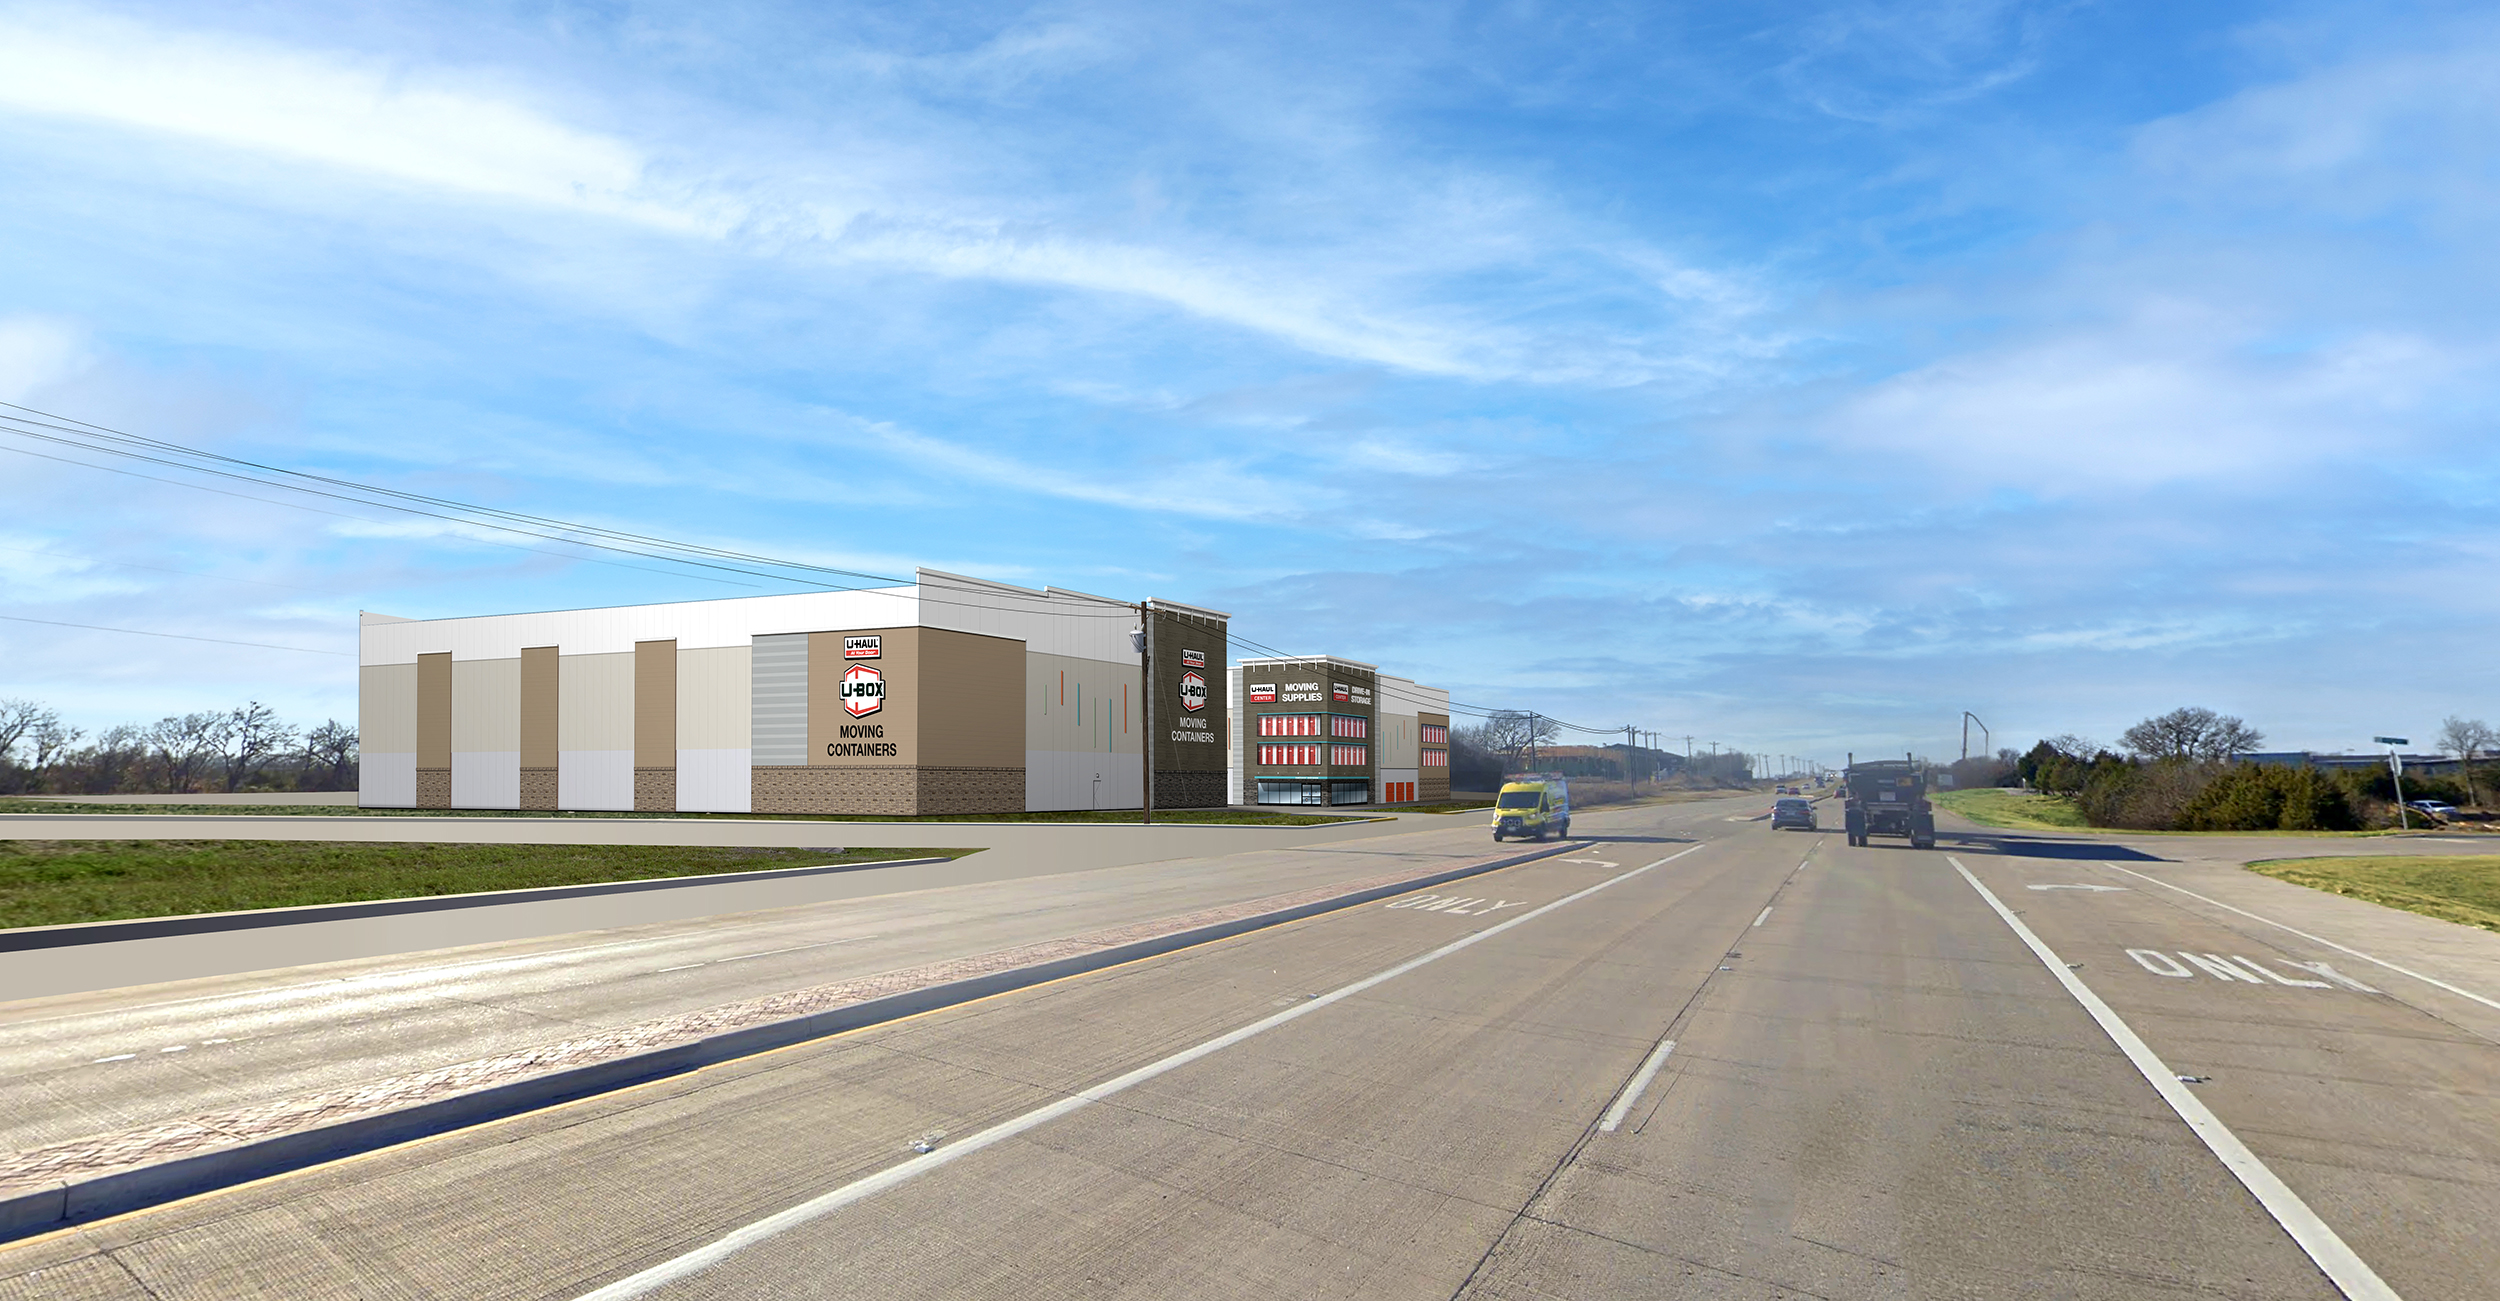 An artist's rendering of a road with a building in the background.